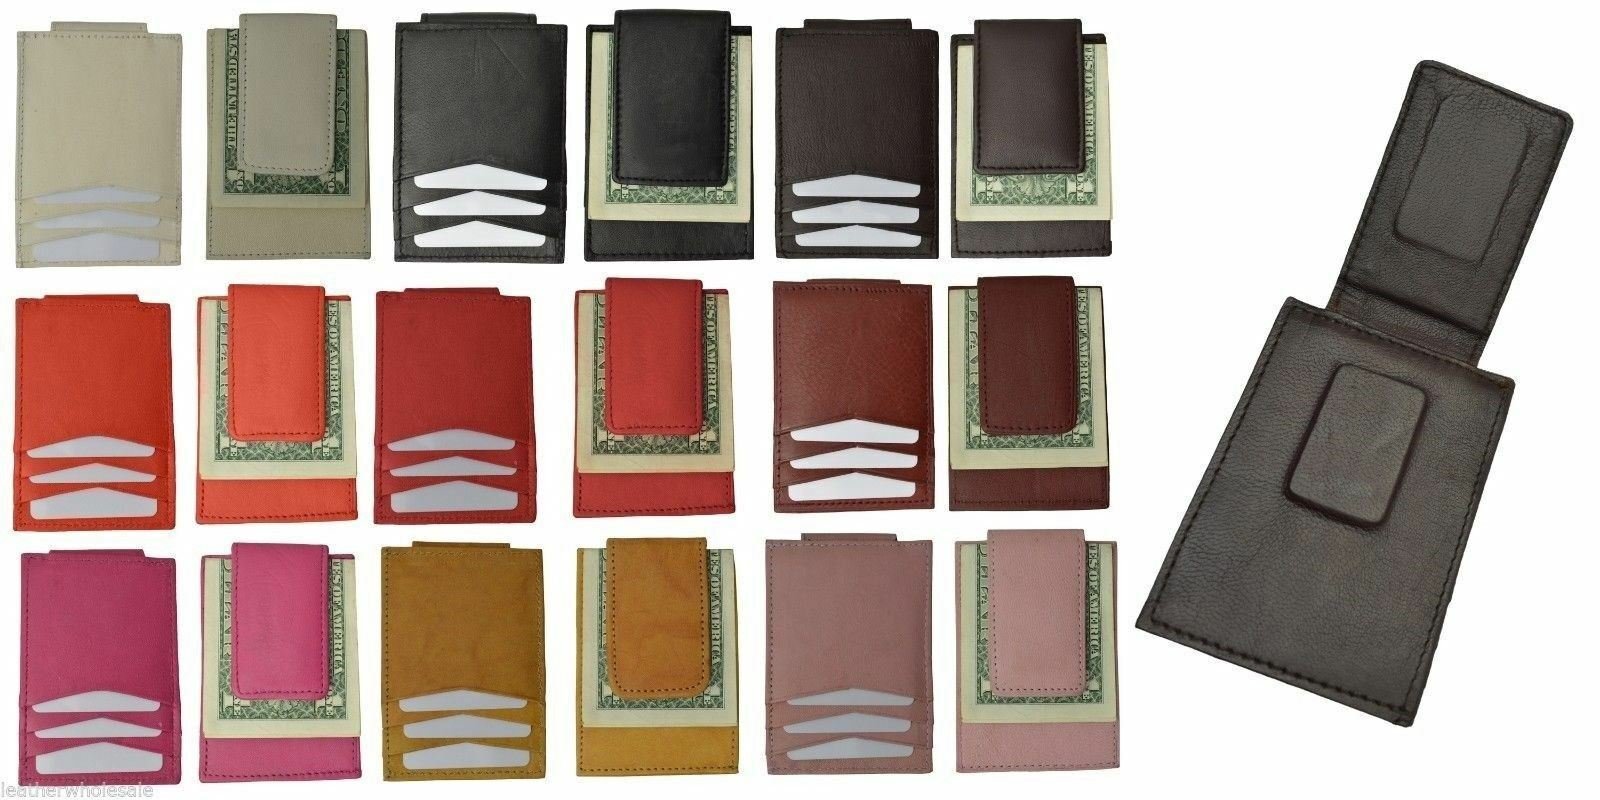 Genuine Leather Mens Slim Magnetic Money Clip Credit Card Holder Compact Colors